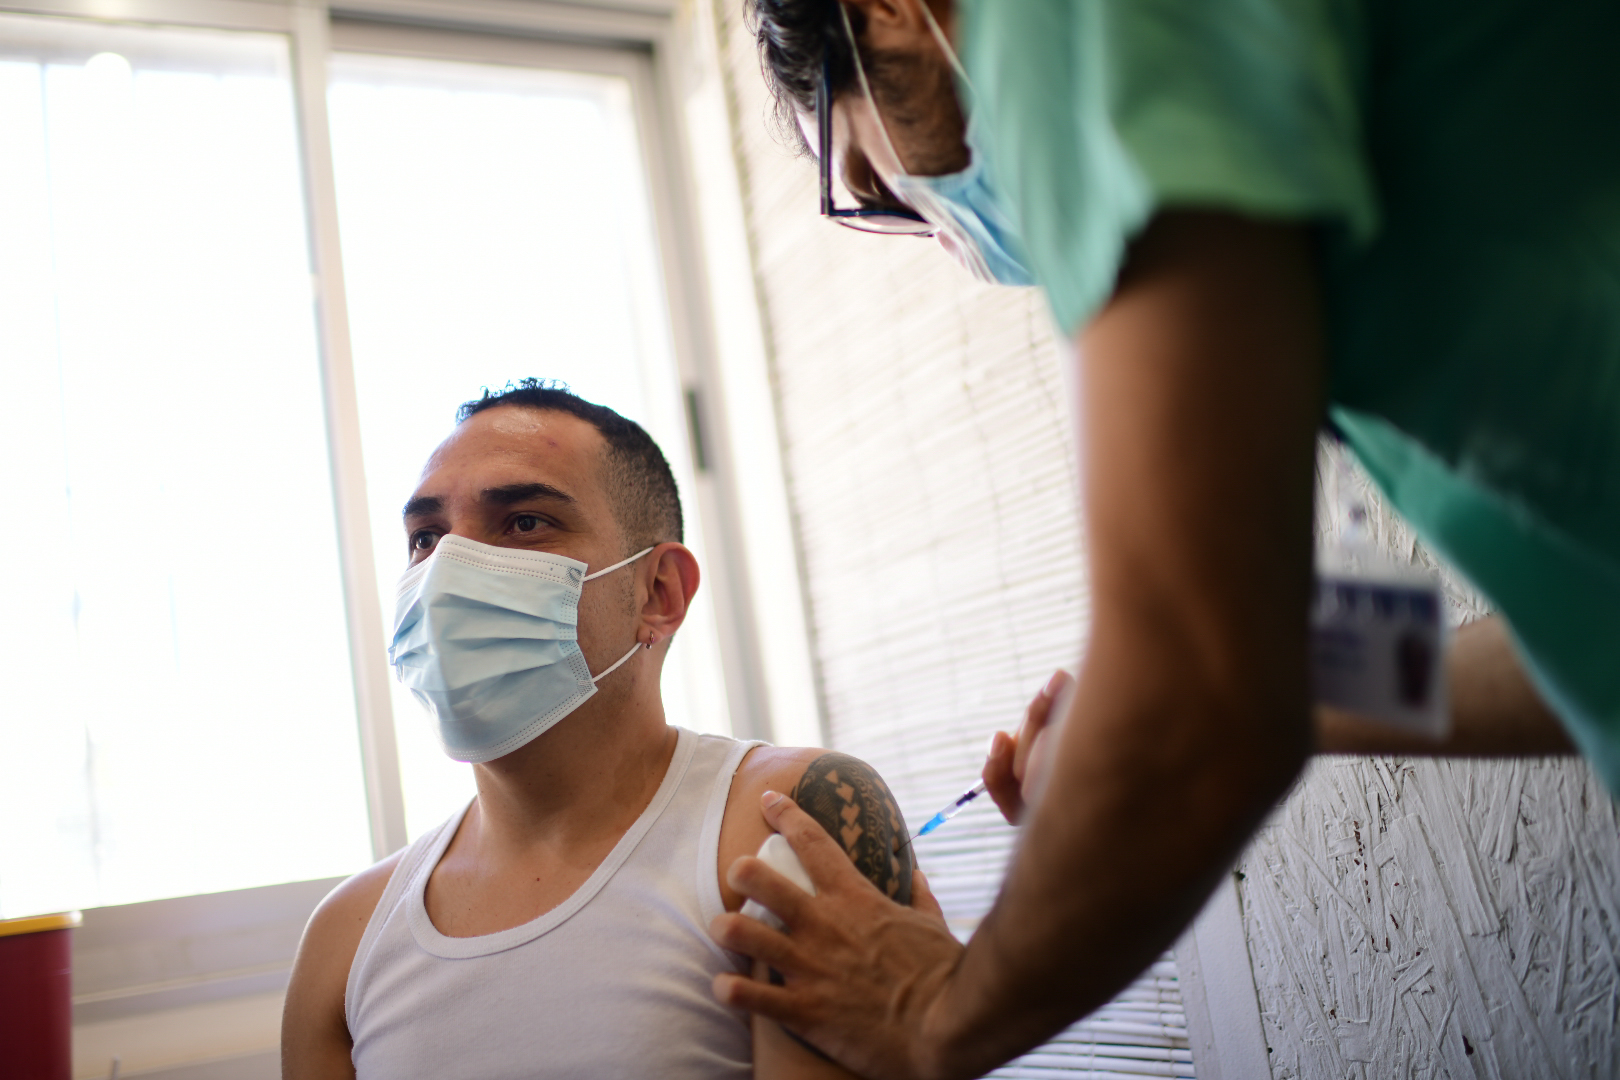 More than half of the population has completed two doses of the vaccine, and Israel will lift an outdoor mask order on Sunday